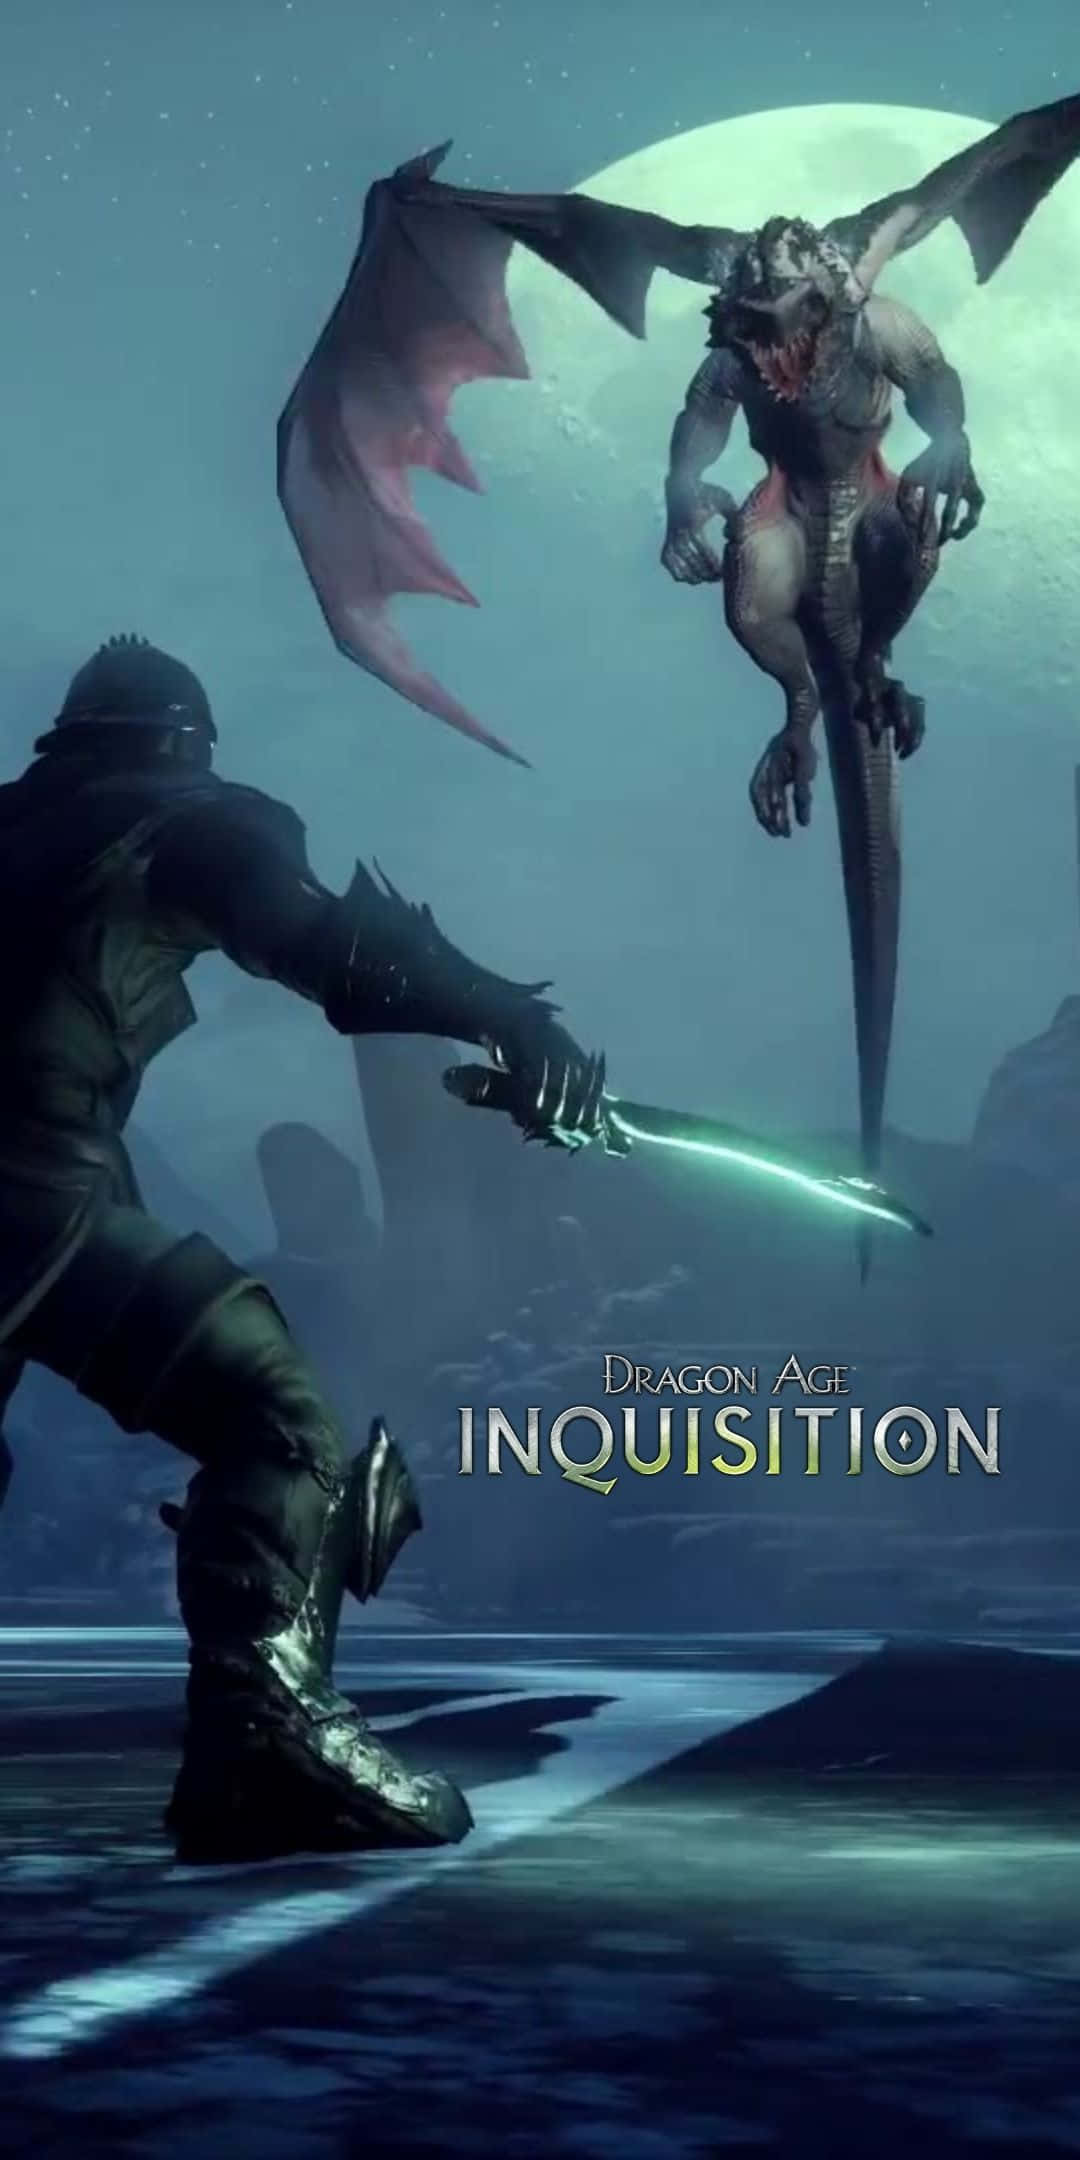 Play Dragon Age Inquisition on the new Google Pixel 3